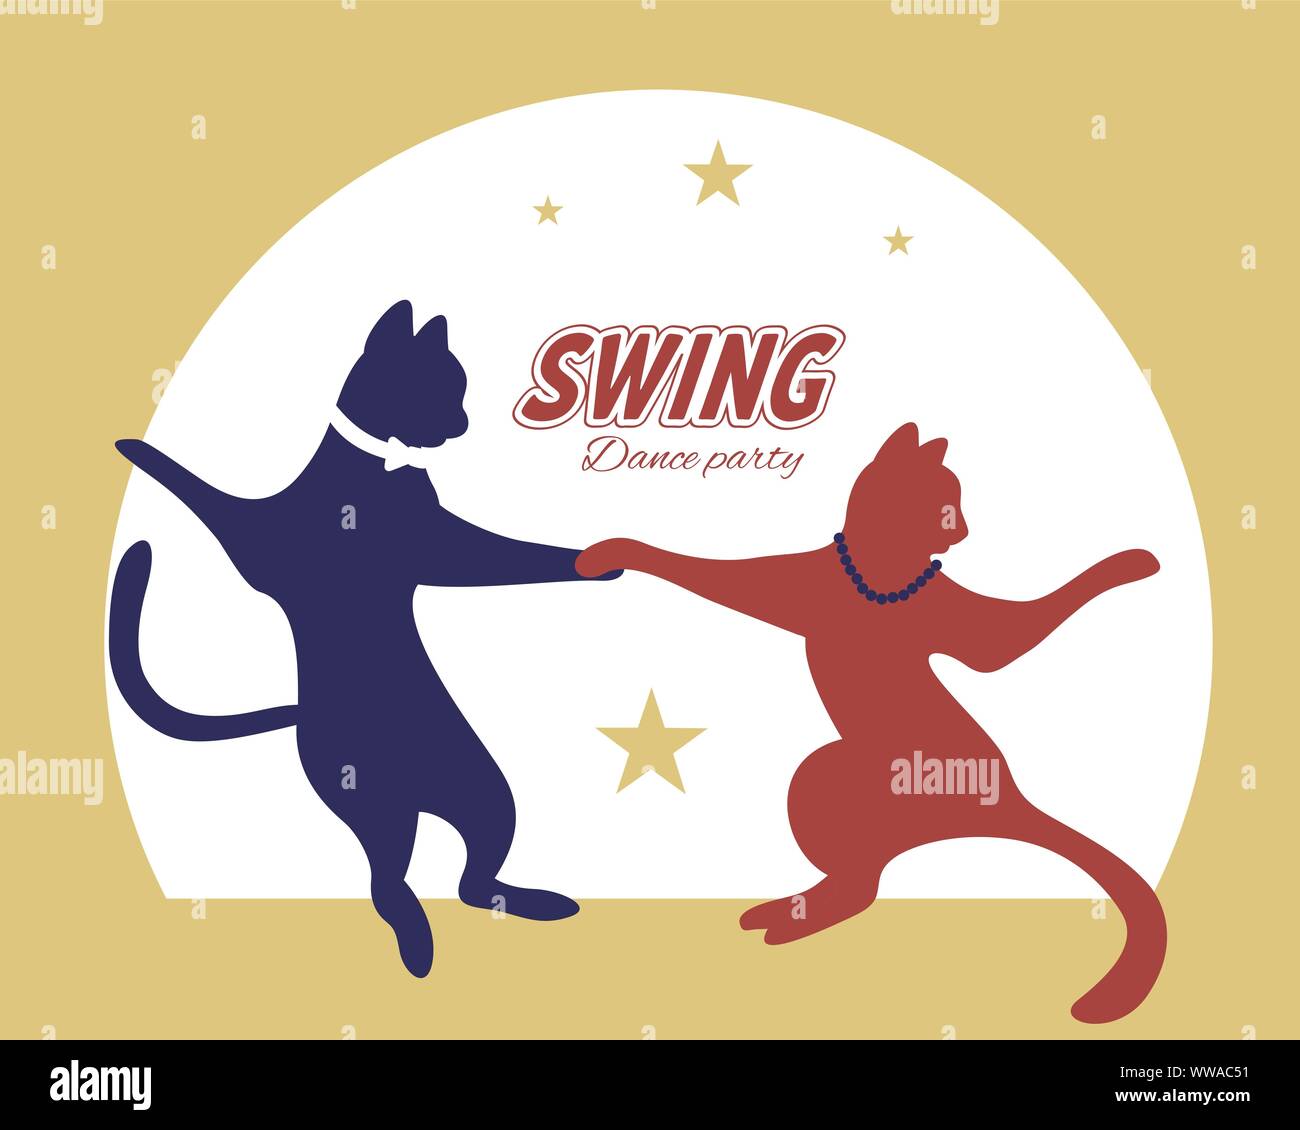 Swing dance couple silhouette of cats with stars and circle on background. 1940s and 1930s style. Flat vector illustration. Stock Vector